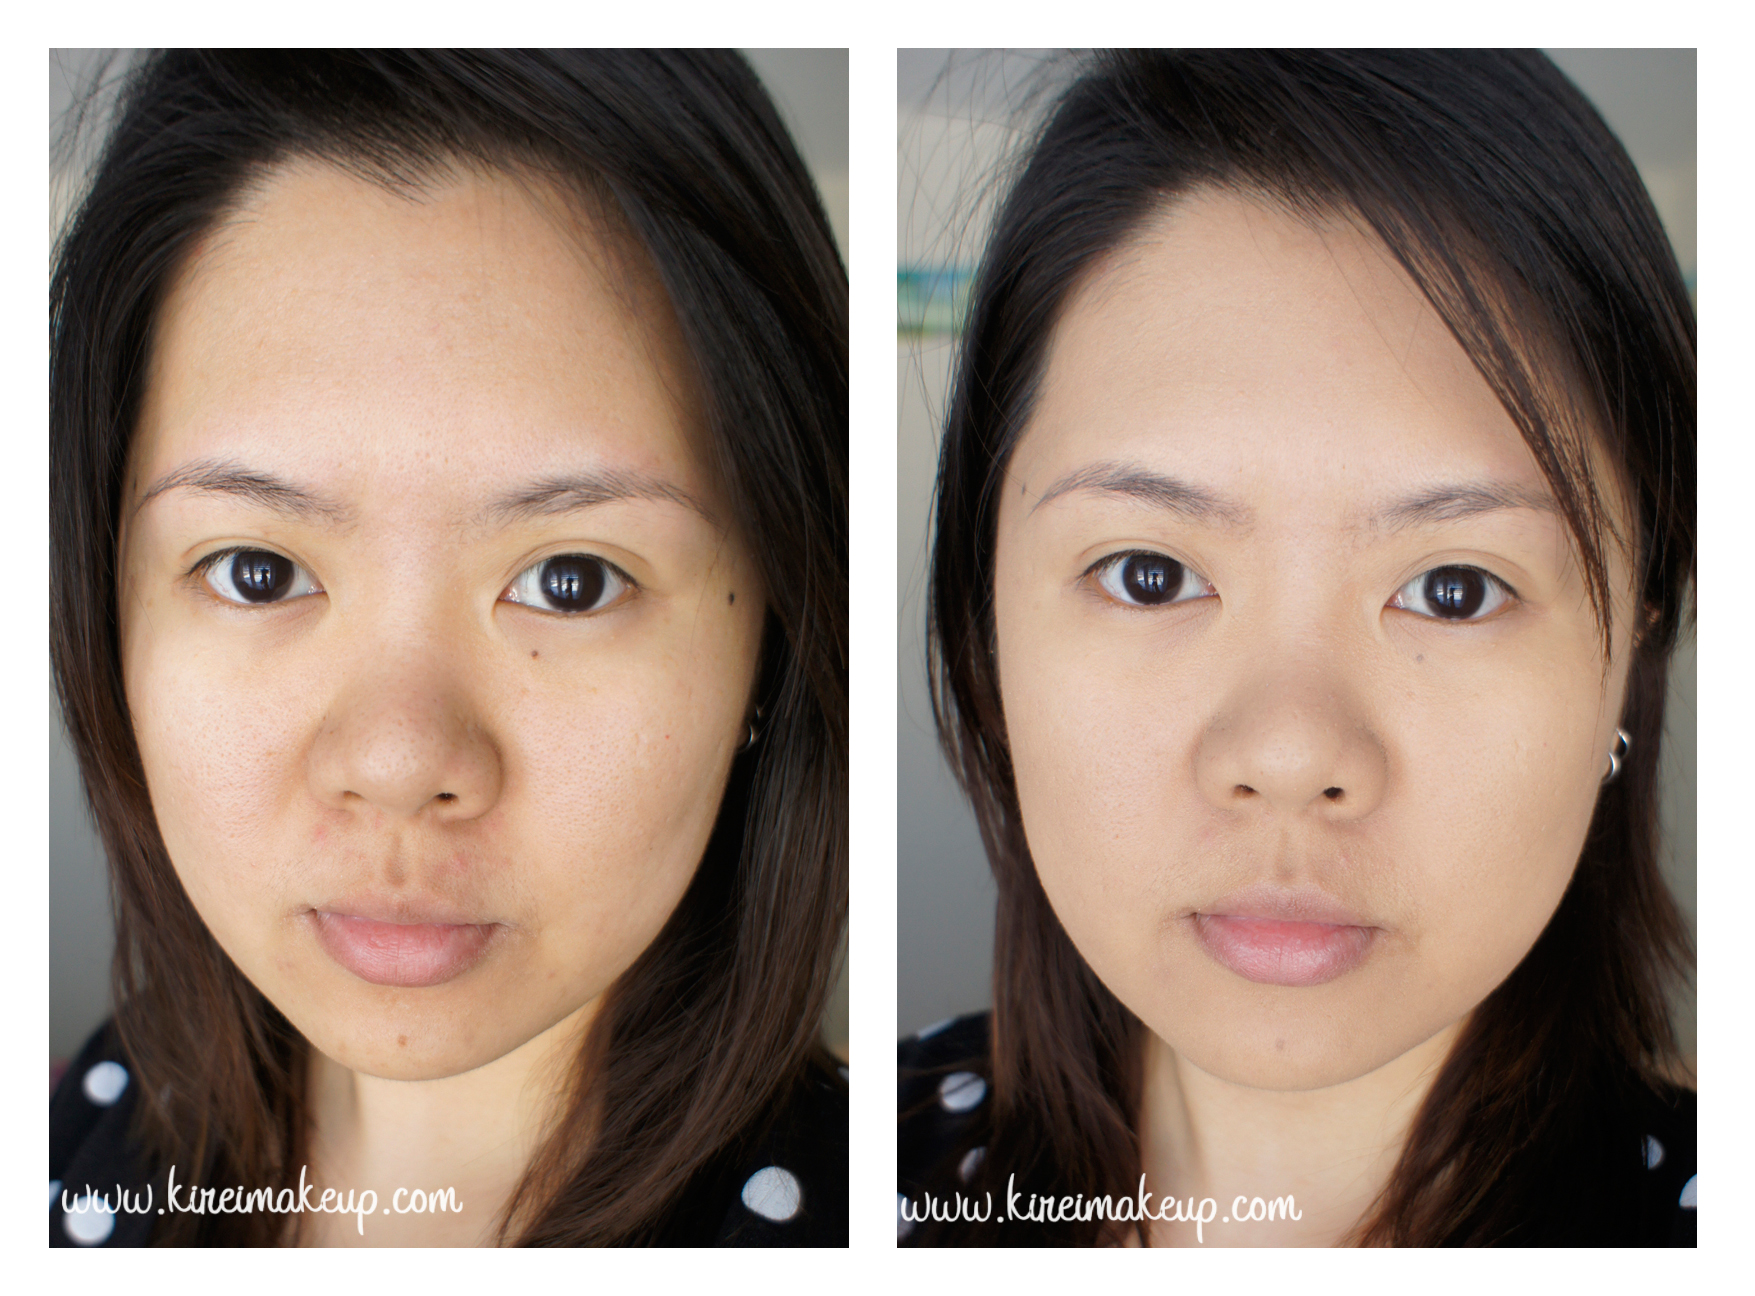 diorskin nude foundation review